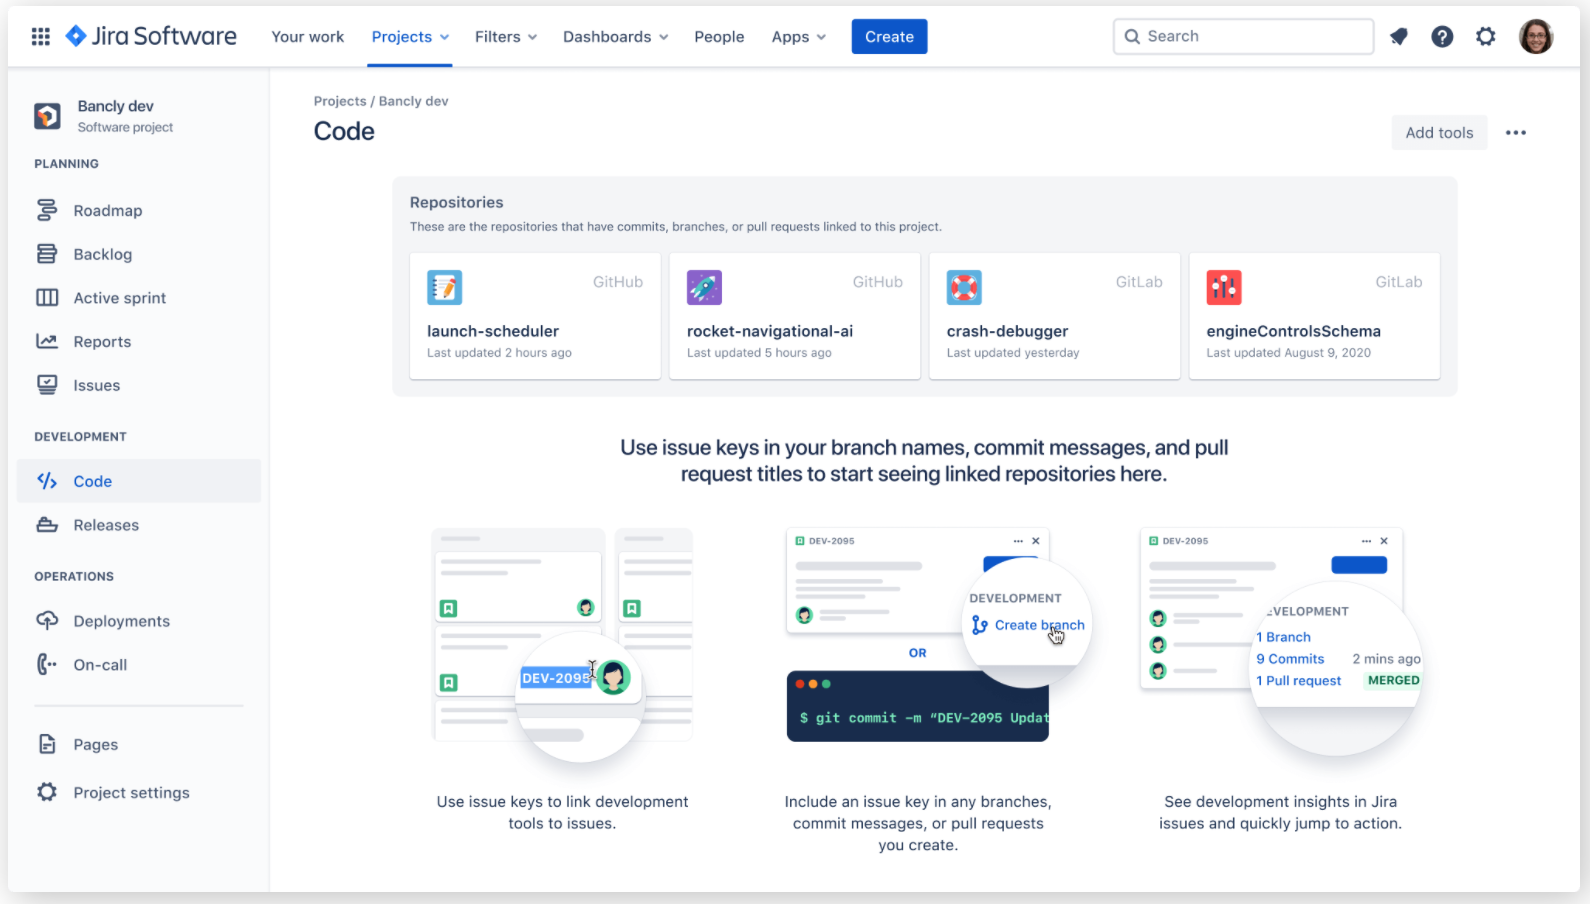 Interface of Jira project management software